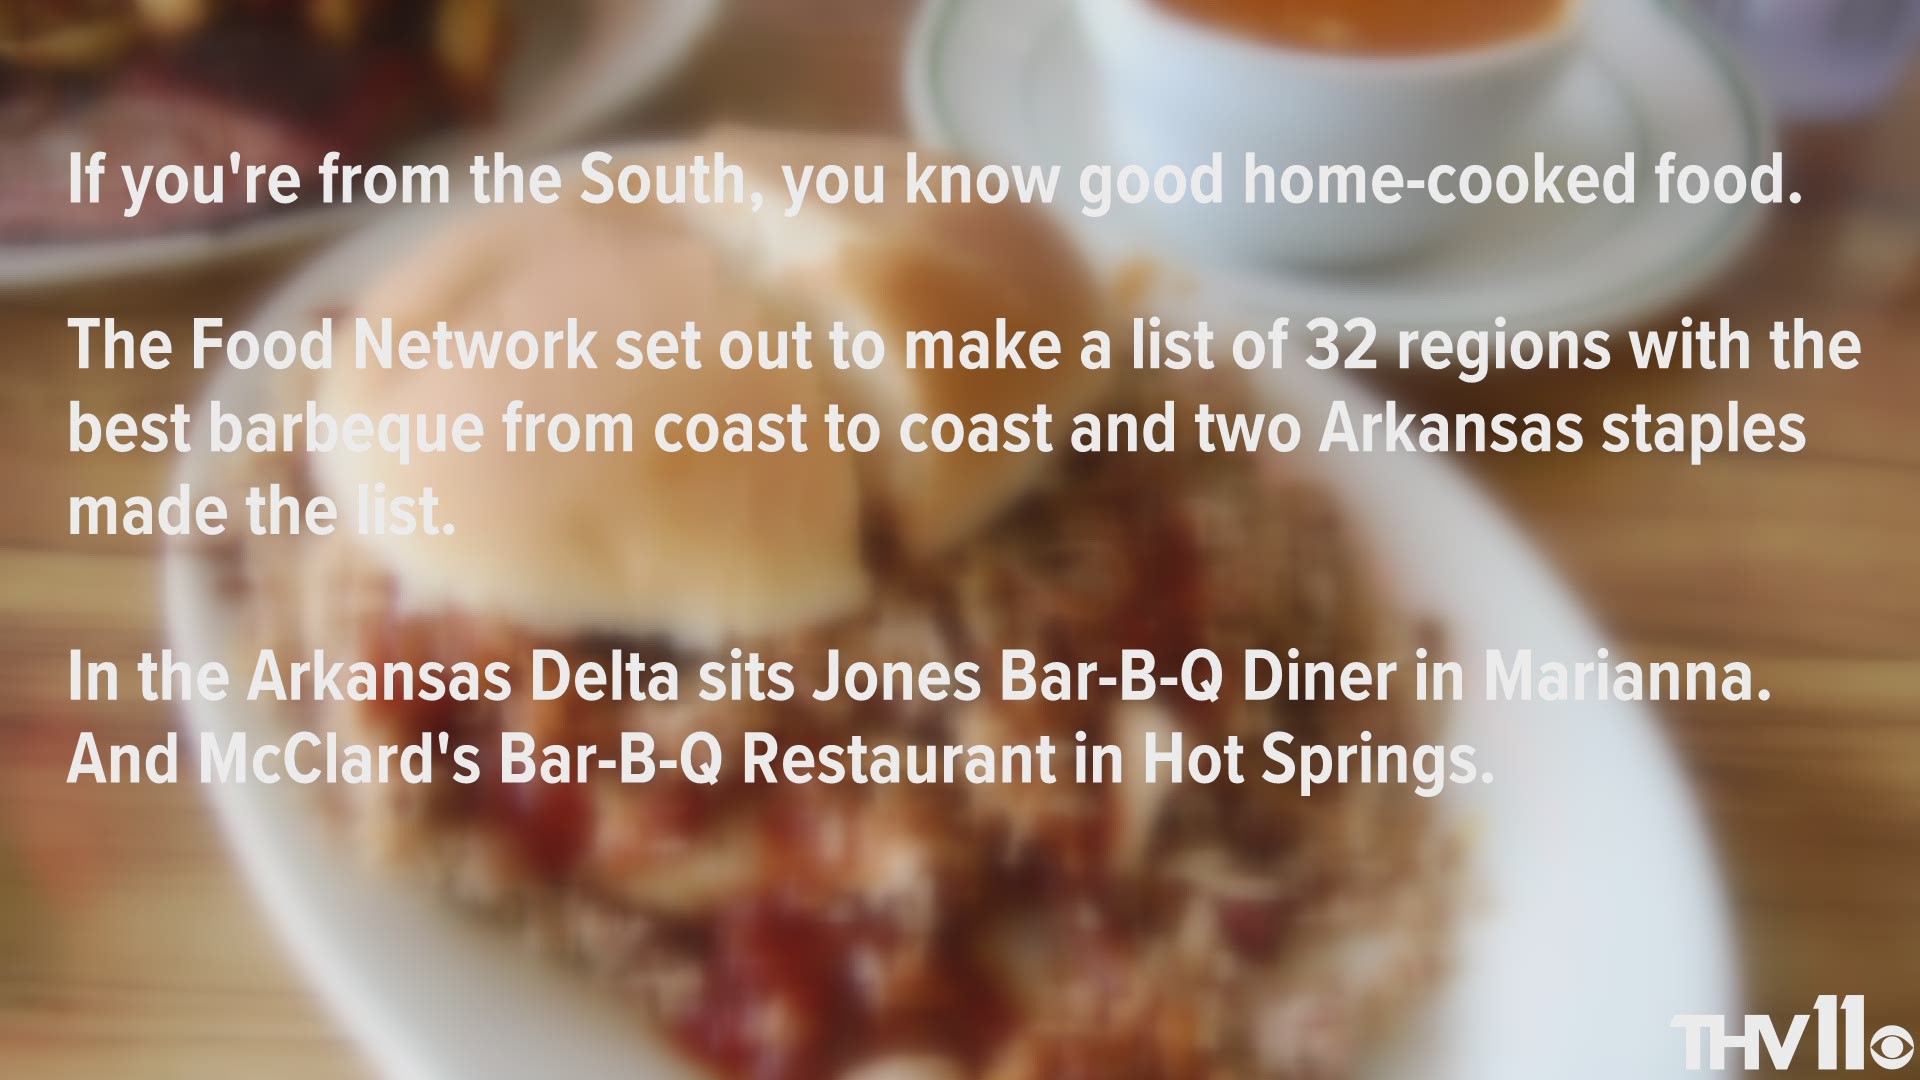 The Food Network set out to make a list of 32 regions with the best barbeque from coast to coast and two Arkansas staples made the list!